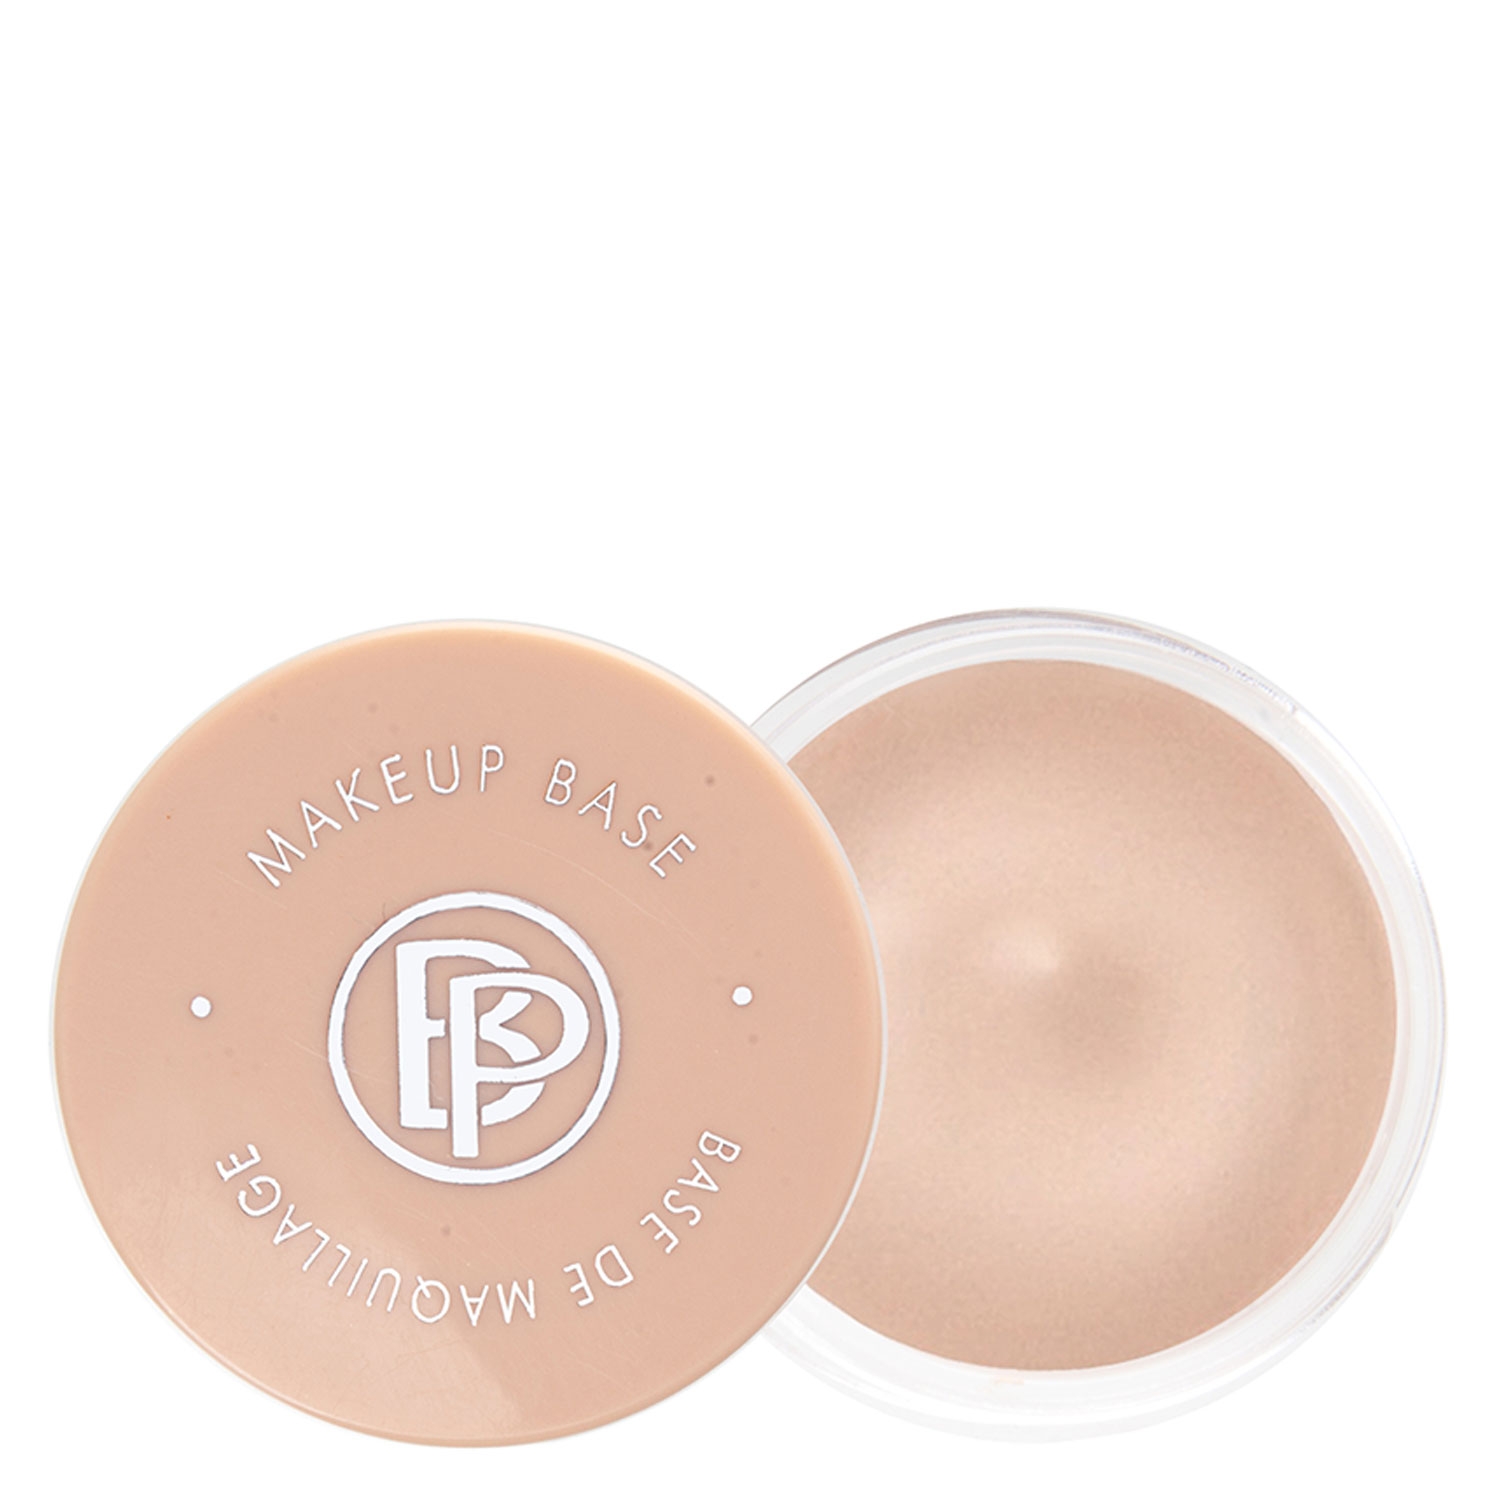 Product image from bellapierre Eyes - Makeup Base